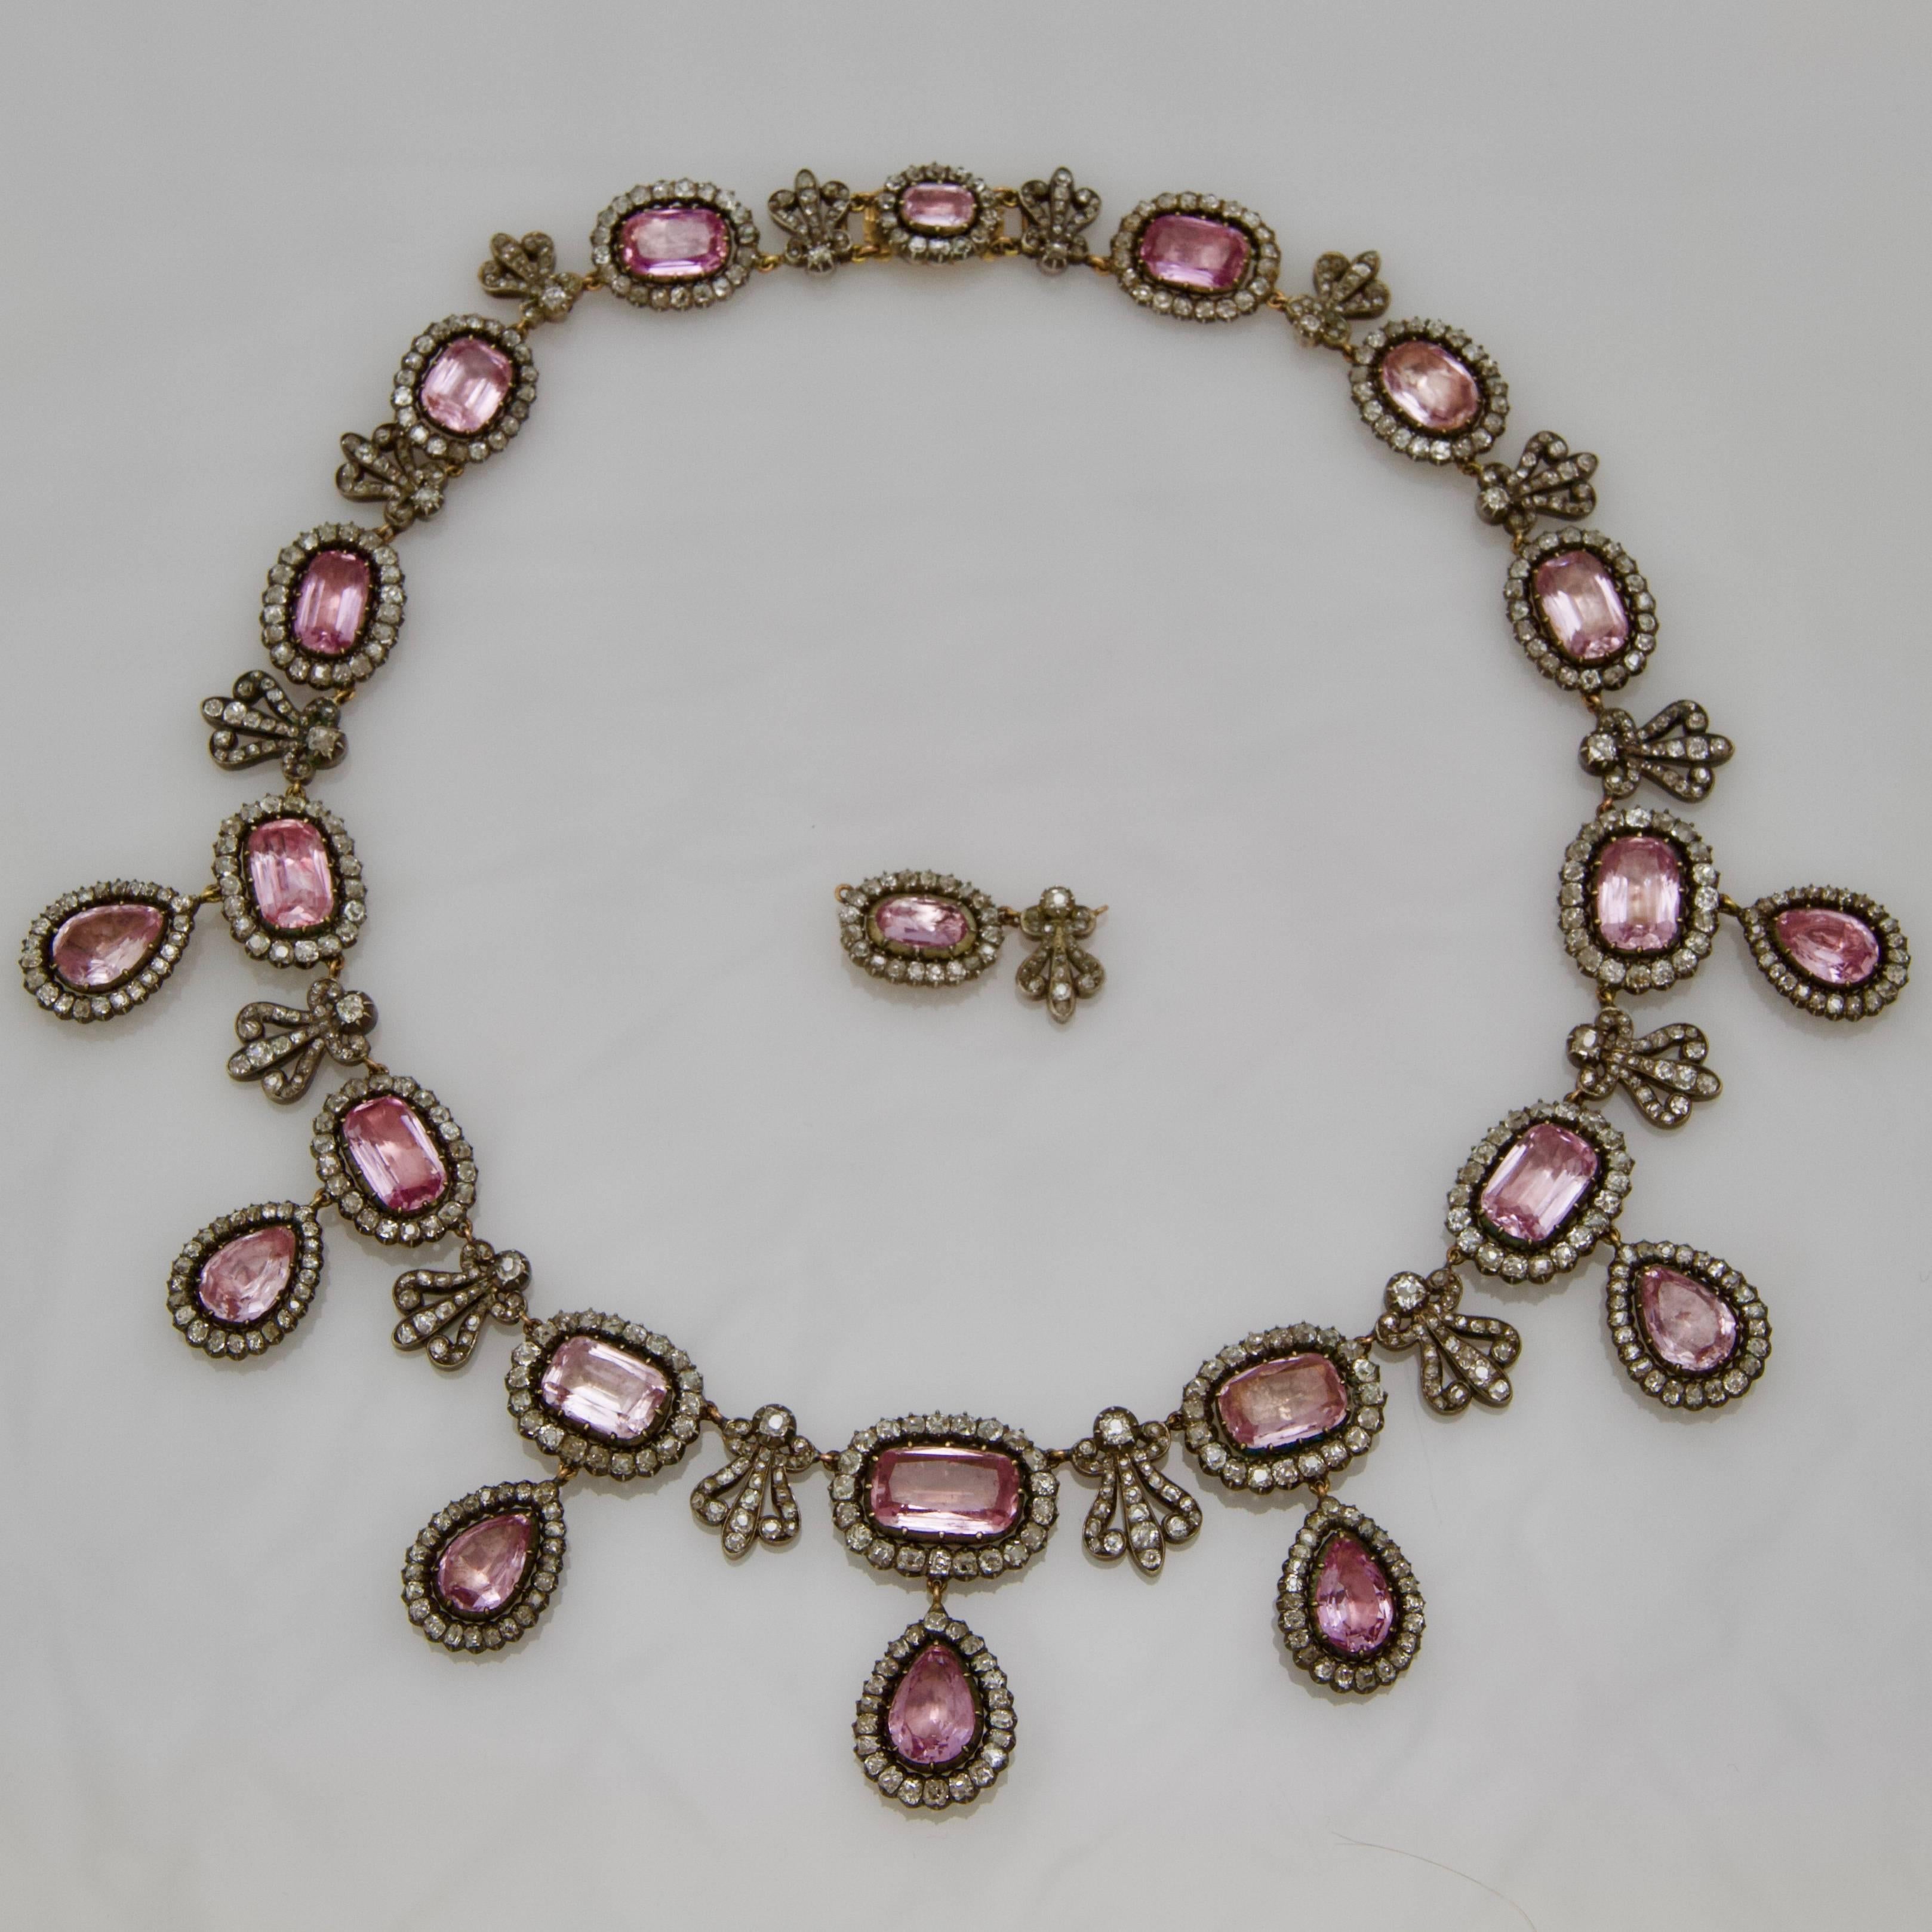 An antique and rare pink topaz and diamond, gold and silver necklace in its red leather case.
Front set with 14 faceted rectangular pink topaz framed by antique-cut diamonds alternating with diamonds palmettes and supporting seven pear-shaped pink